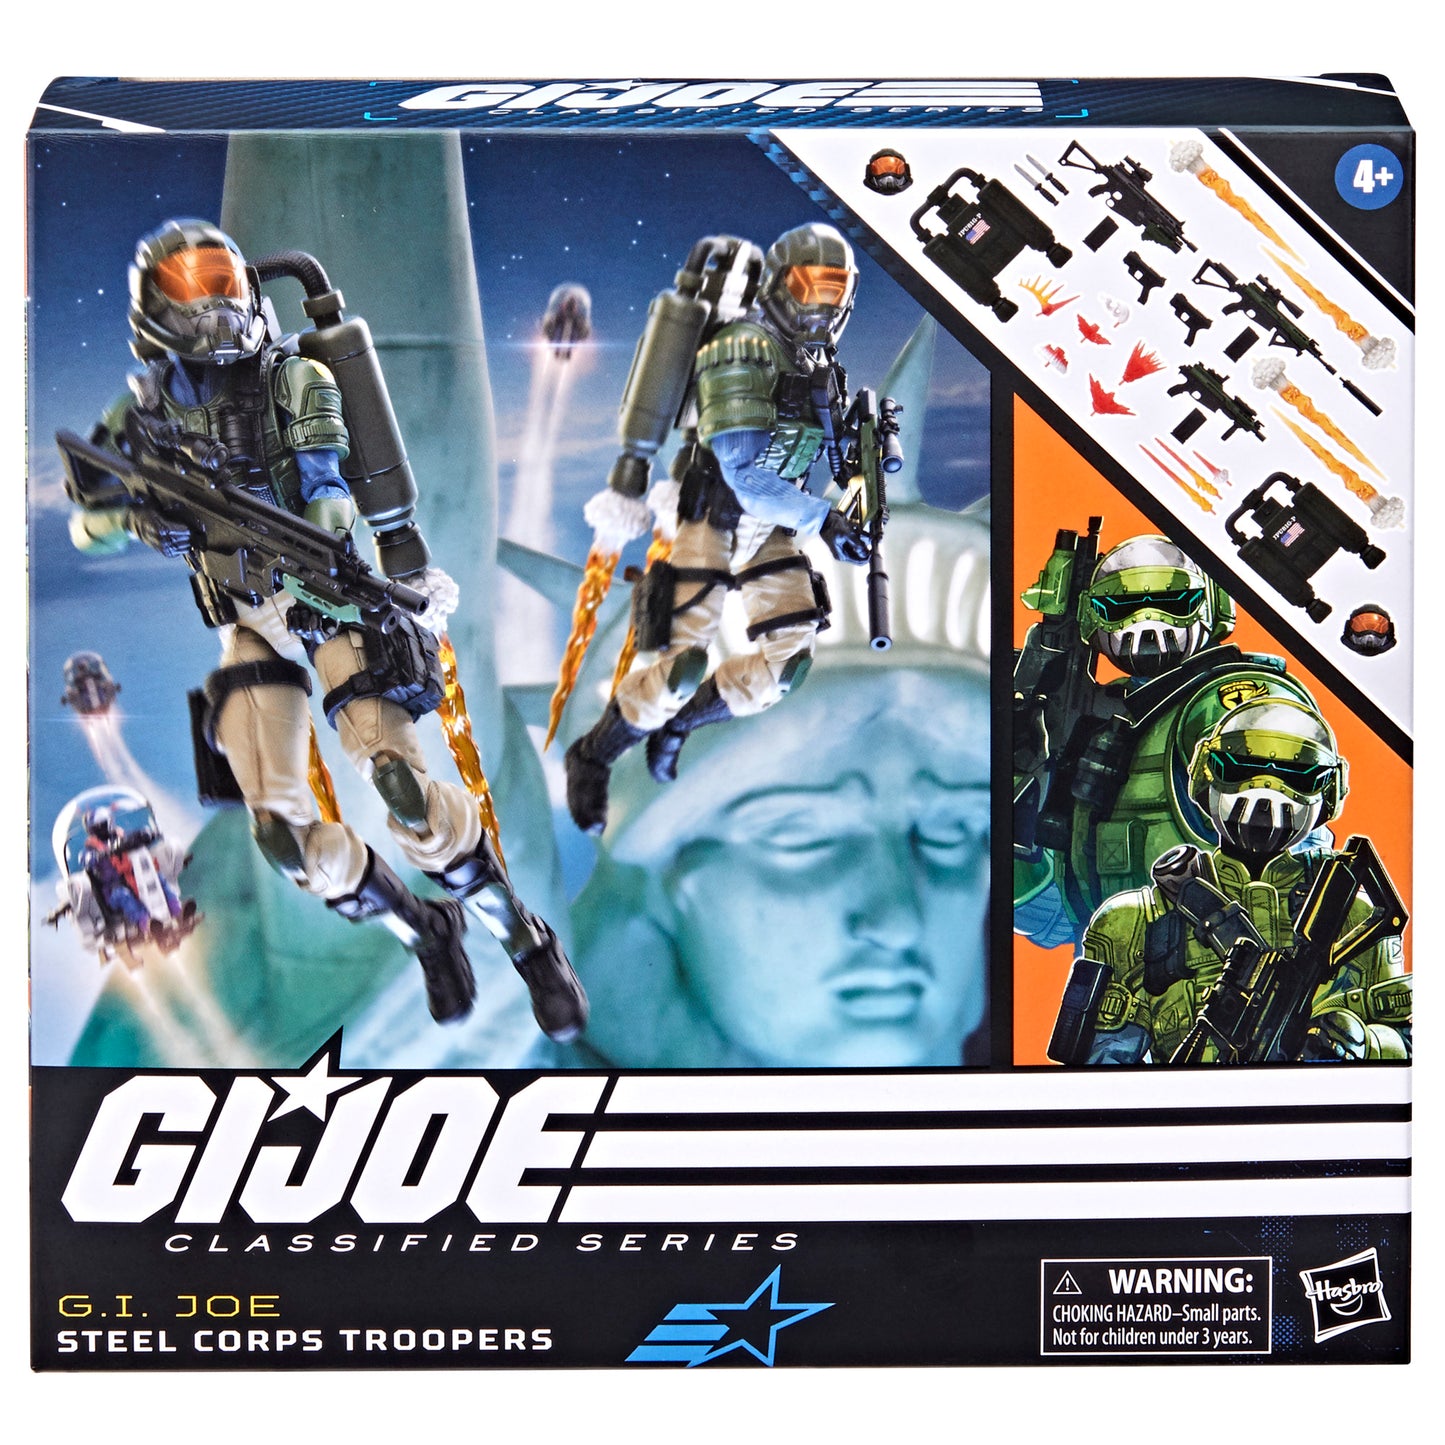 G.I. Joe Classified Series Steel Corps Troopers in a box front view - Heretoserveyou